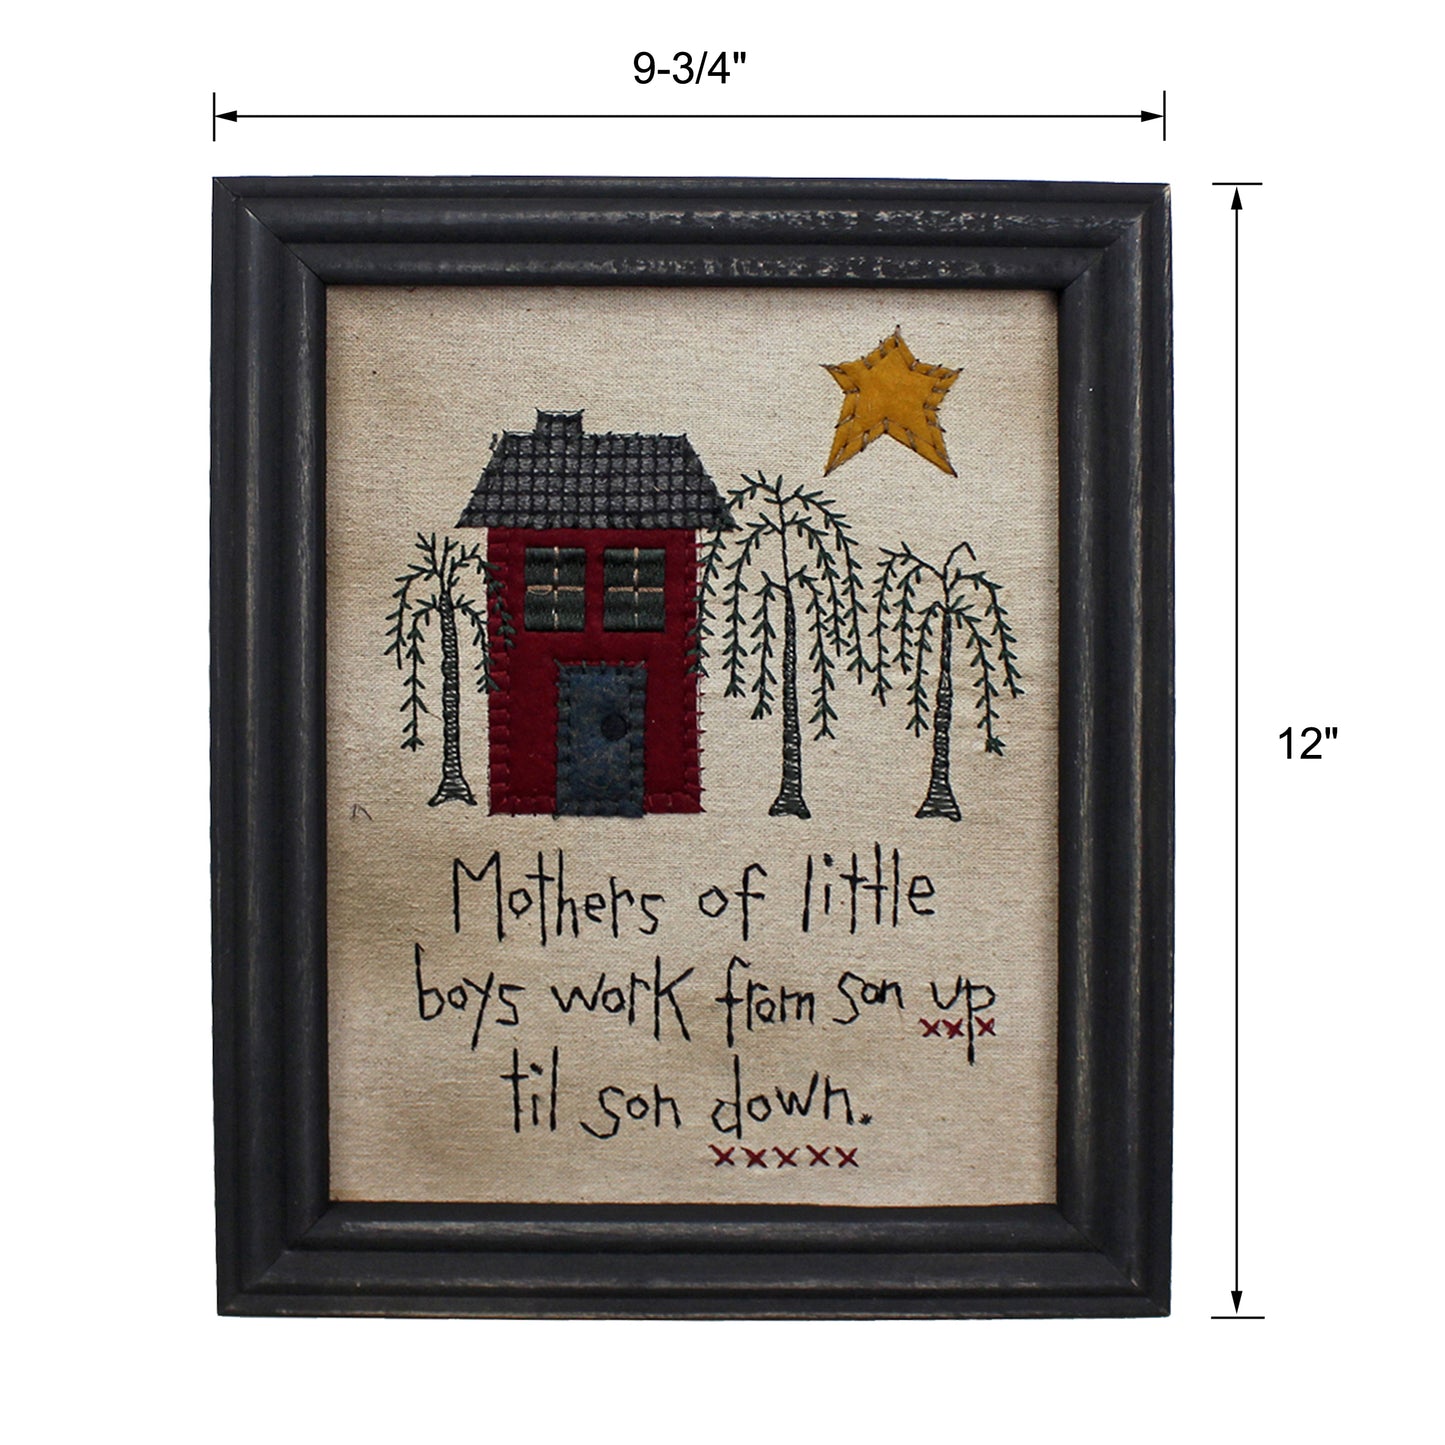 CVHOMEDECO. Primitives Antique Mothers of Little Boys Work from Son up til Son Down Stitchery Frame Wall Mounted Hanging Decor Art, 9.75 x 12 Inch